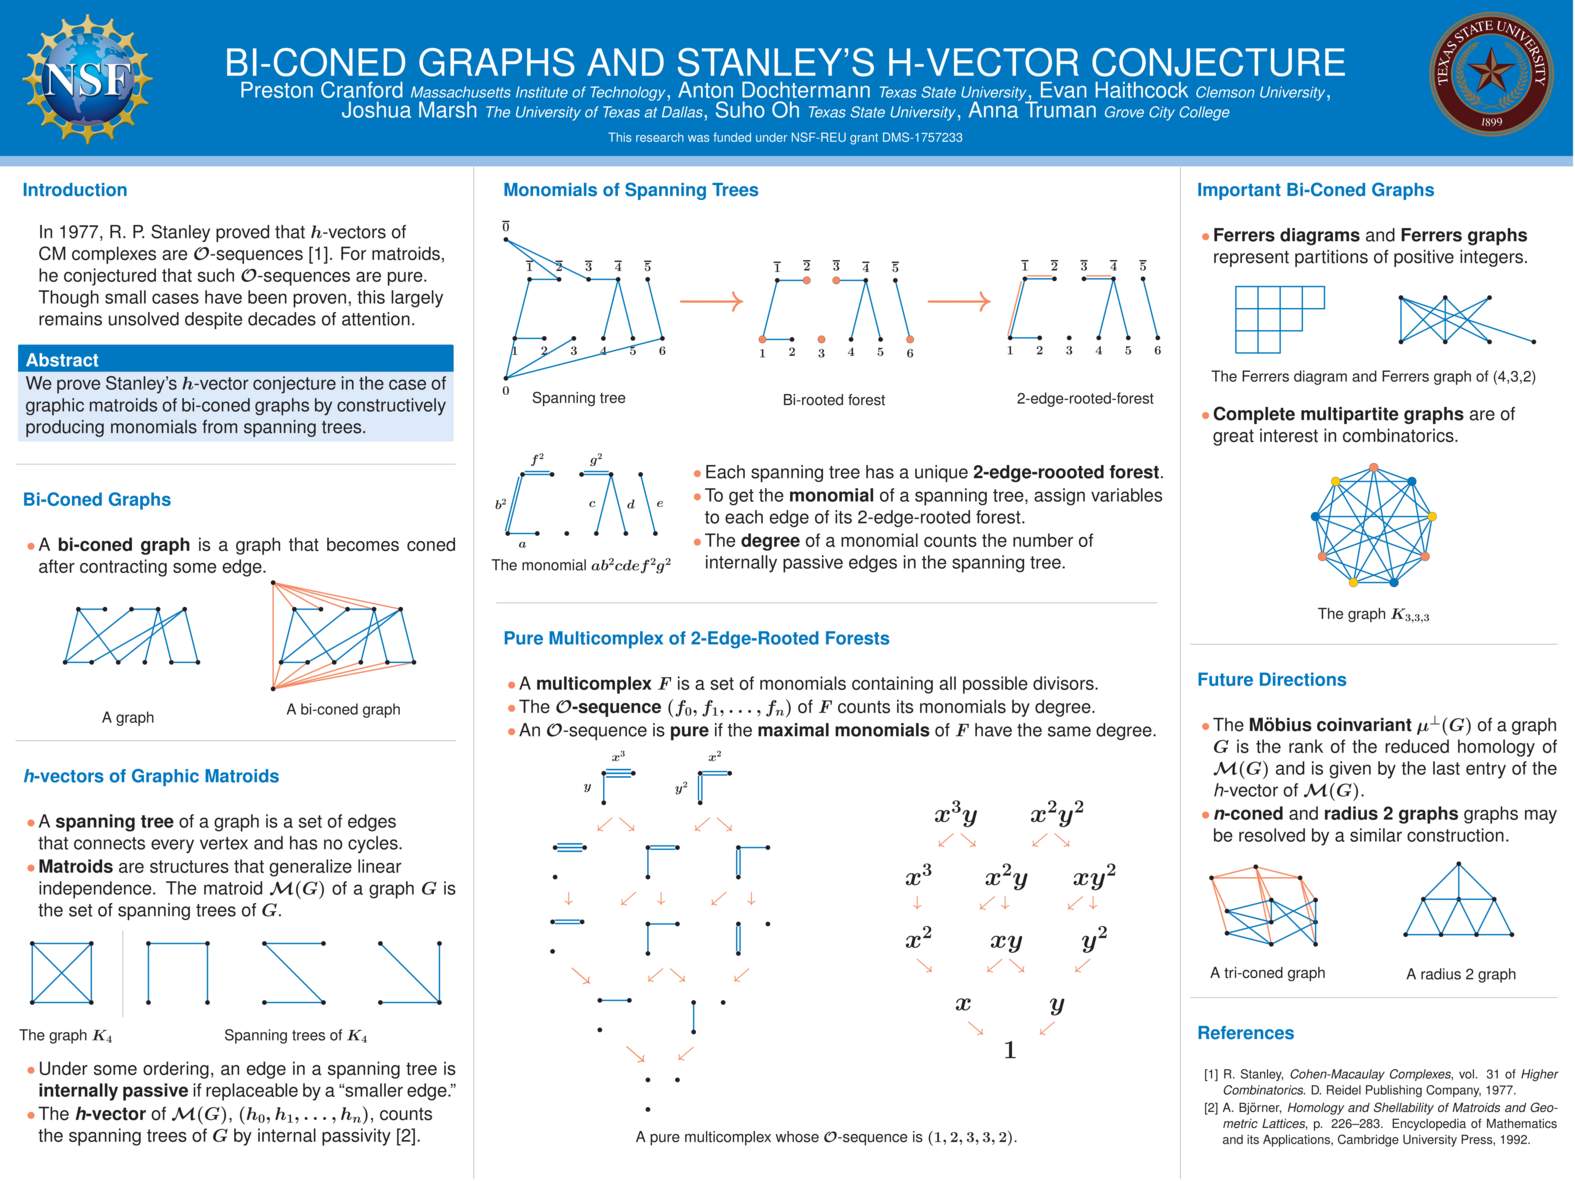 Bi-Coned Graphs and Stanley's H-Vector Conjecture